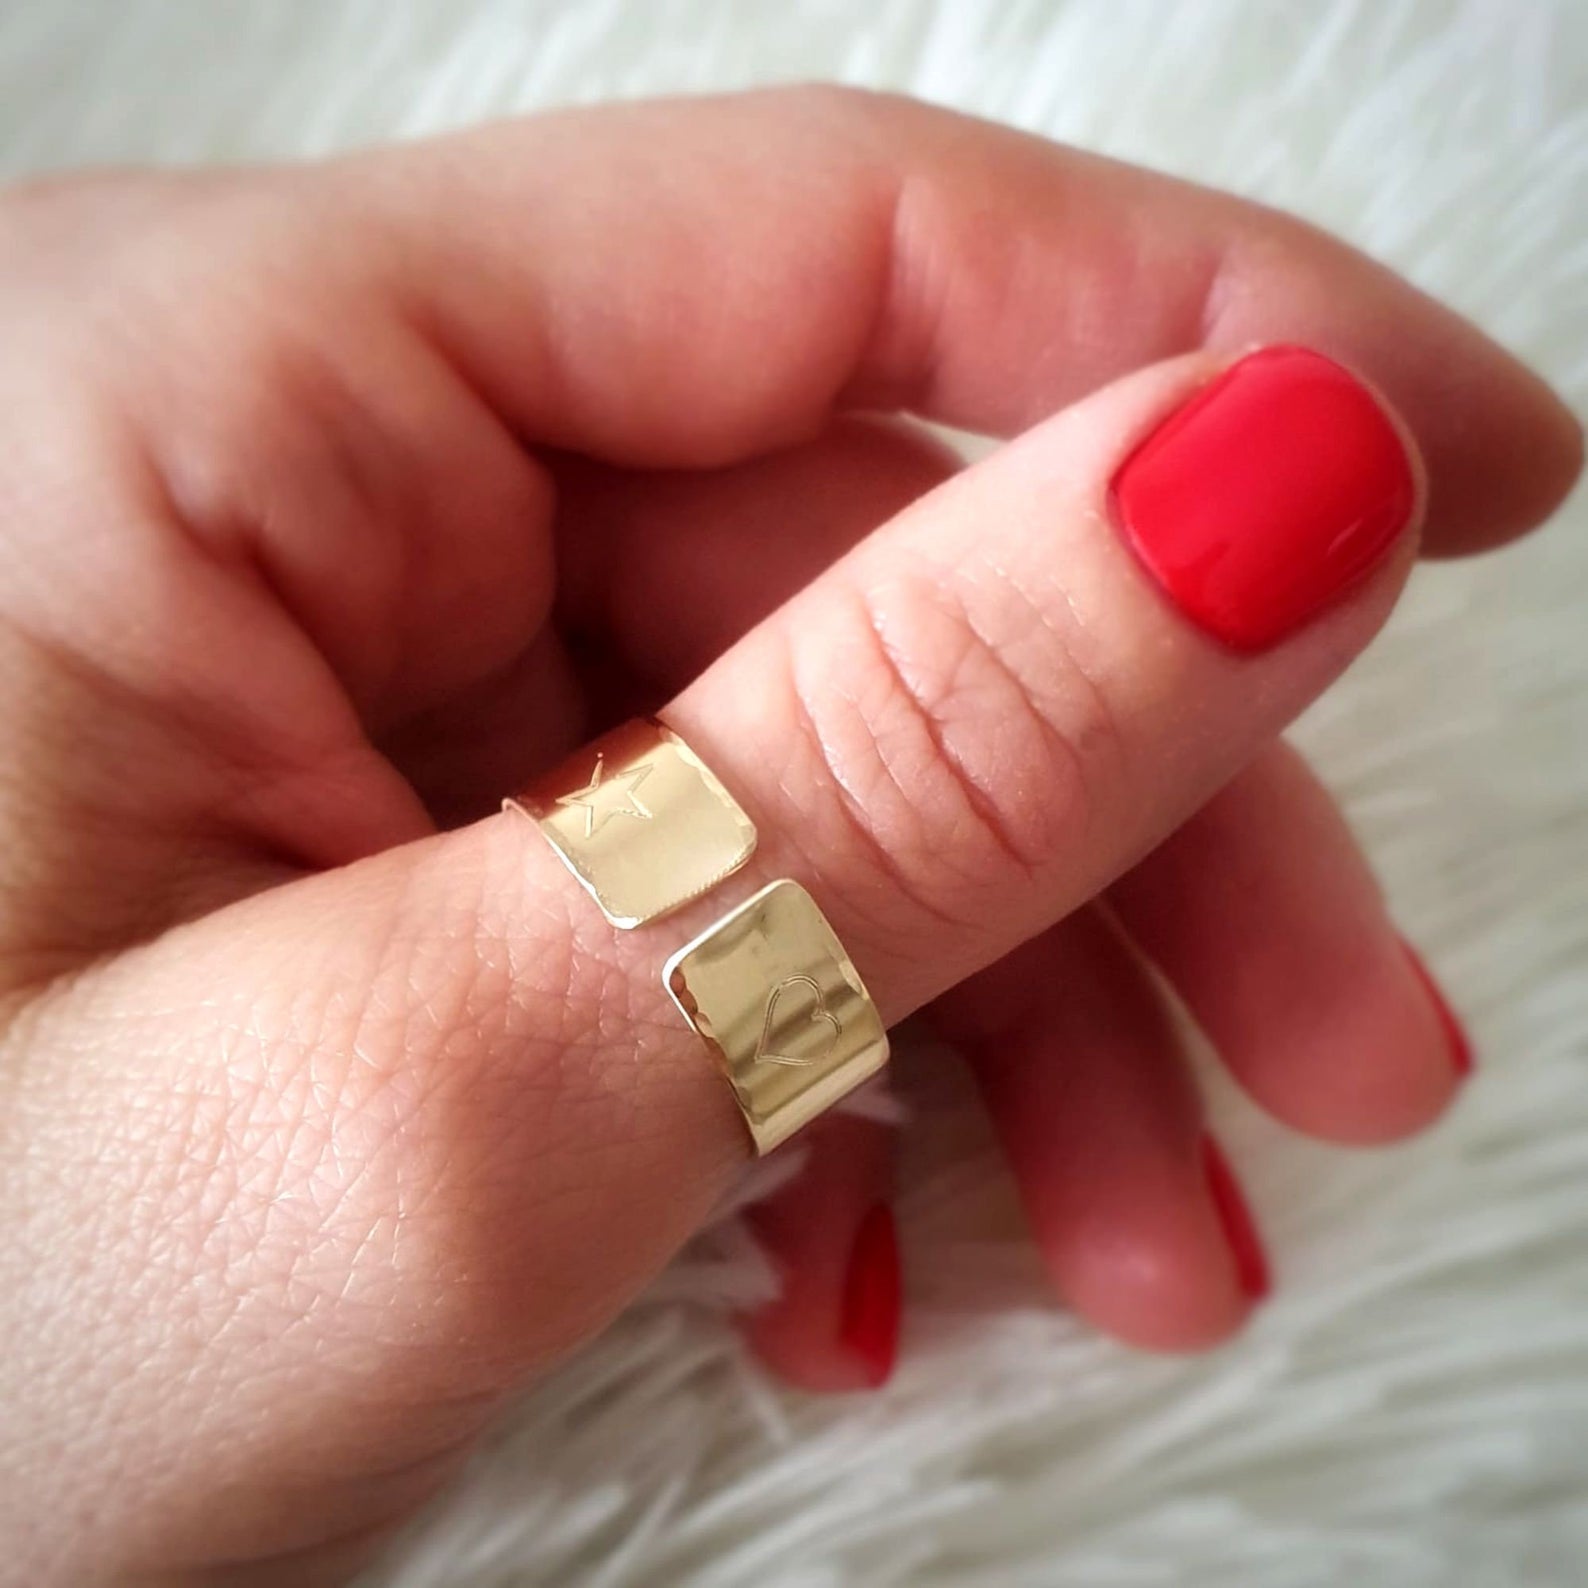 14K Gold Filled Cocktail Ring - Gold Leaf Ring - Adjustable Gold Ring -  Nadin Art Design - Personalized Jewelry